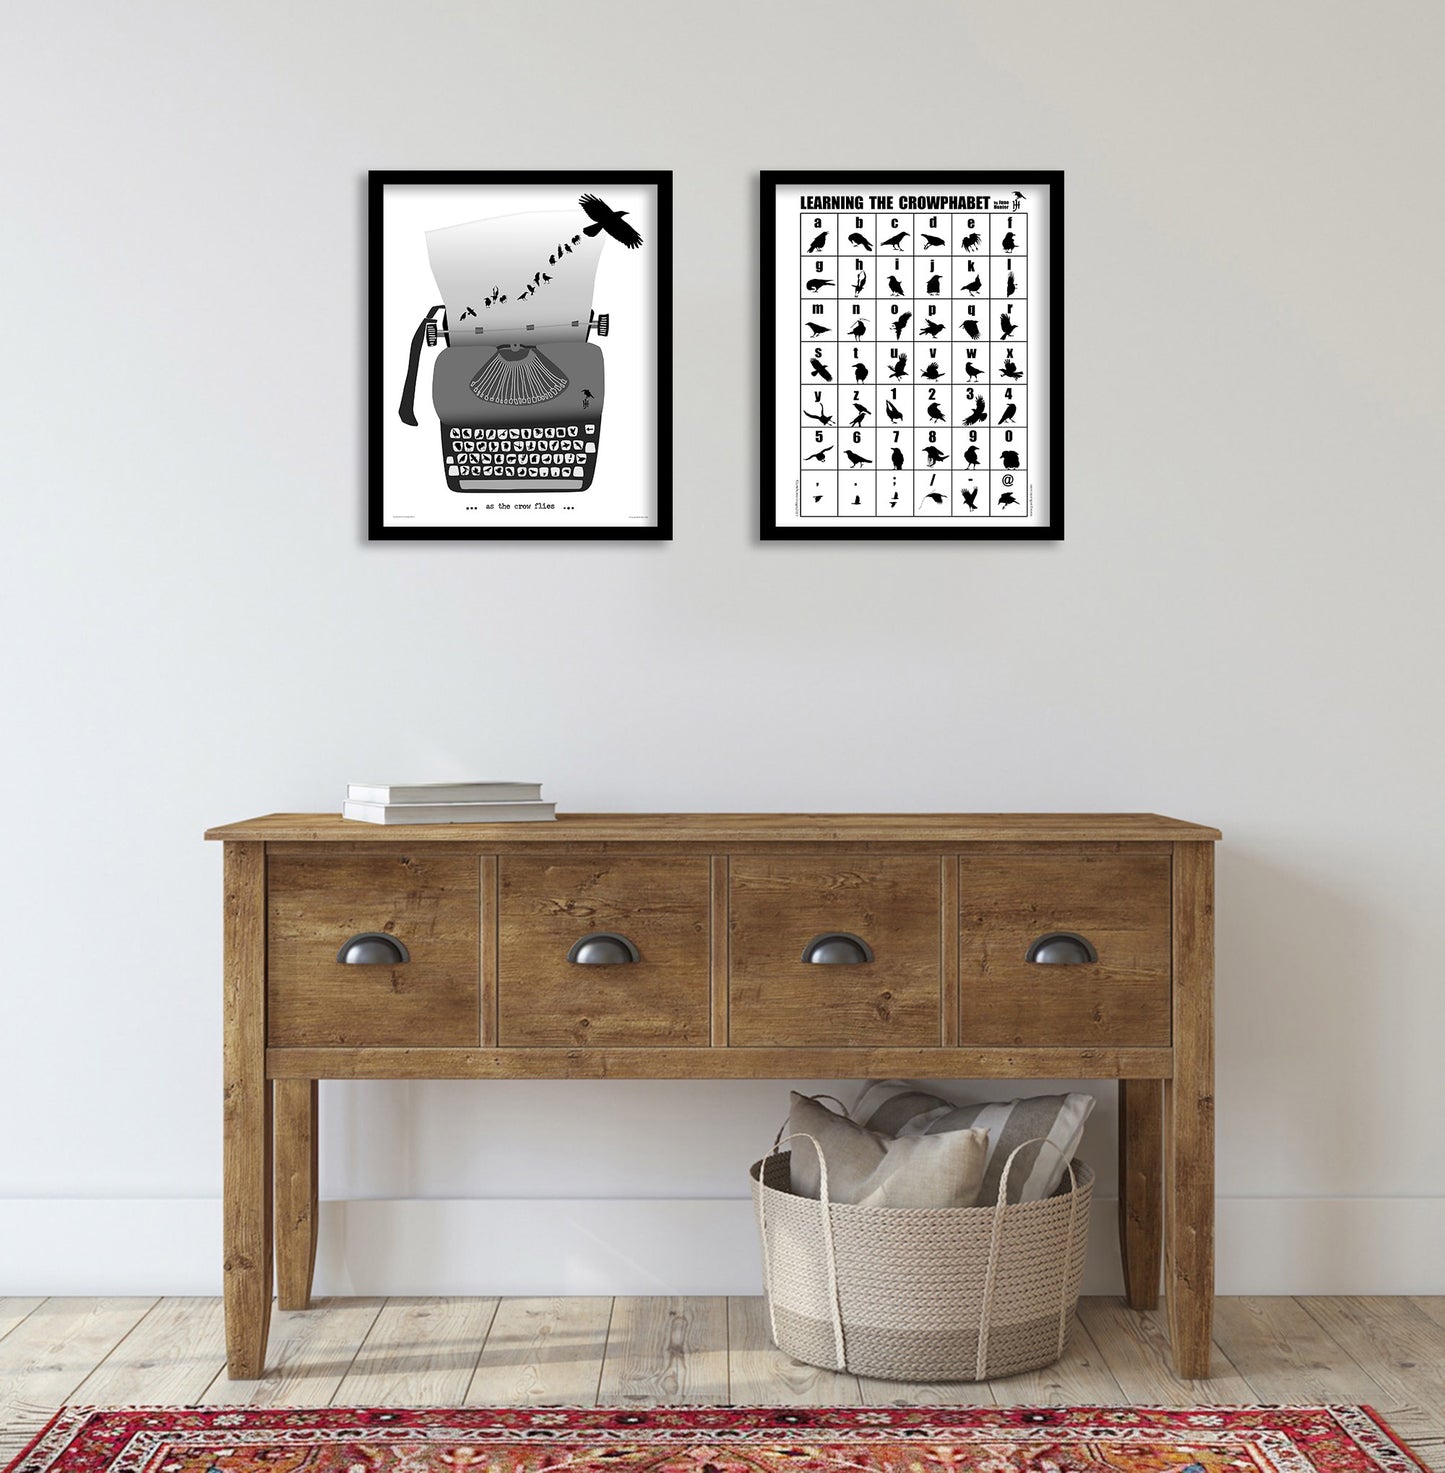 LEARNING THE CROWPHABET — Black and White Poster - SALE